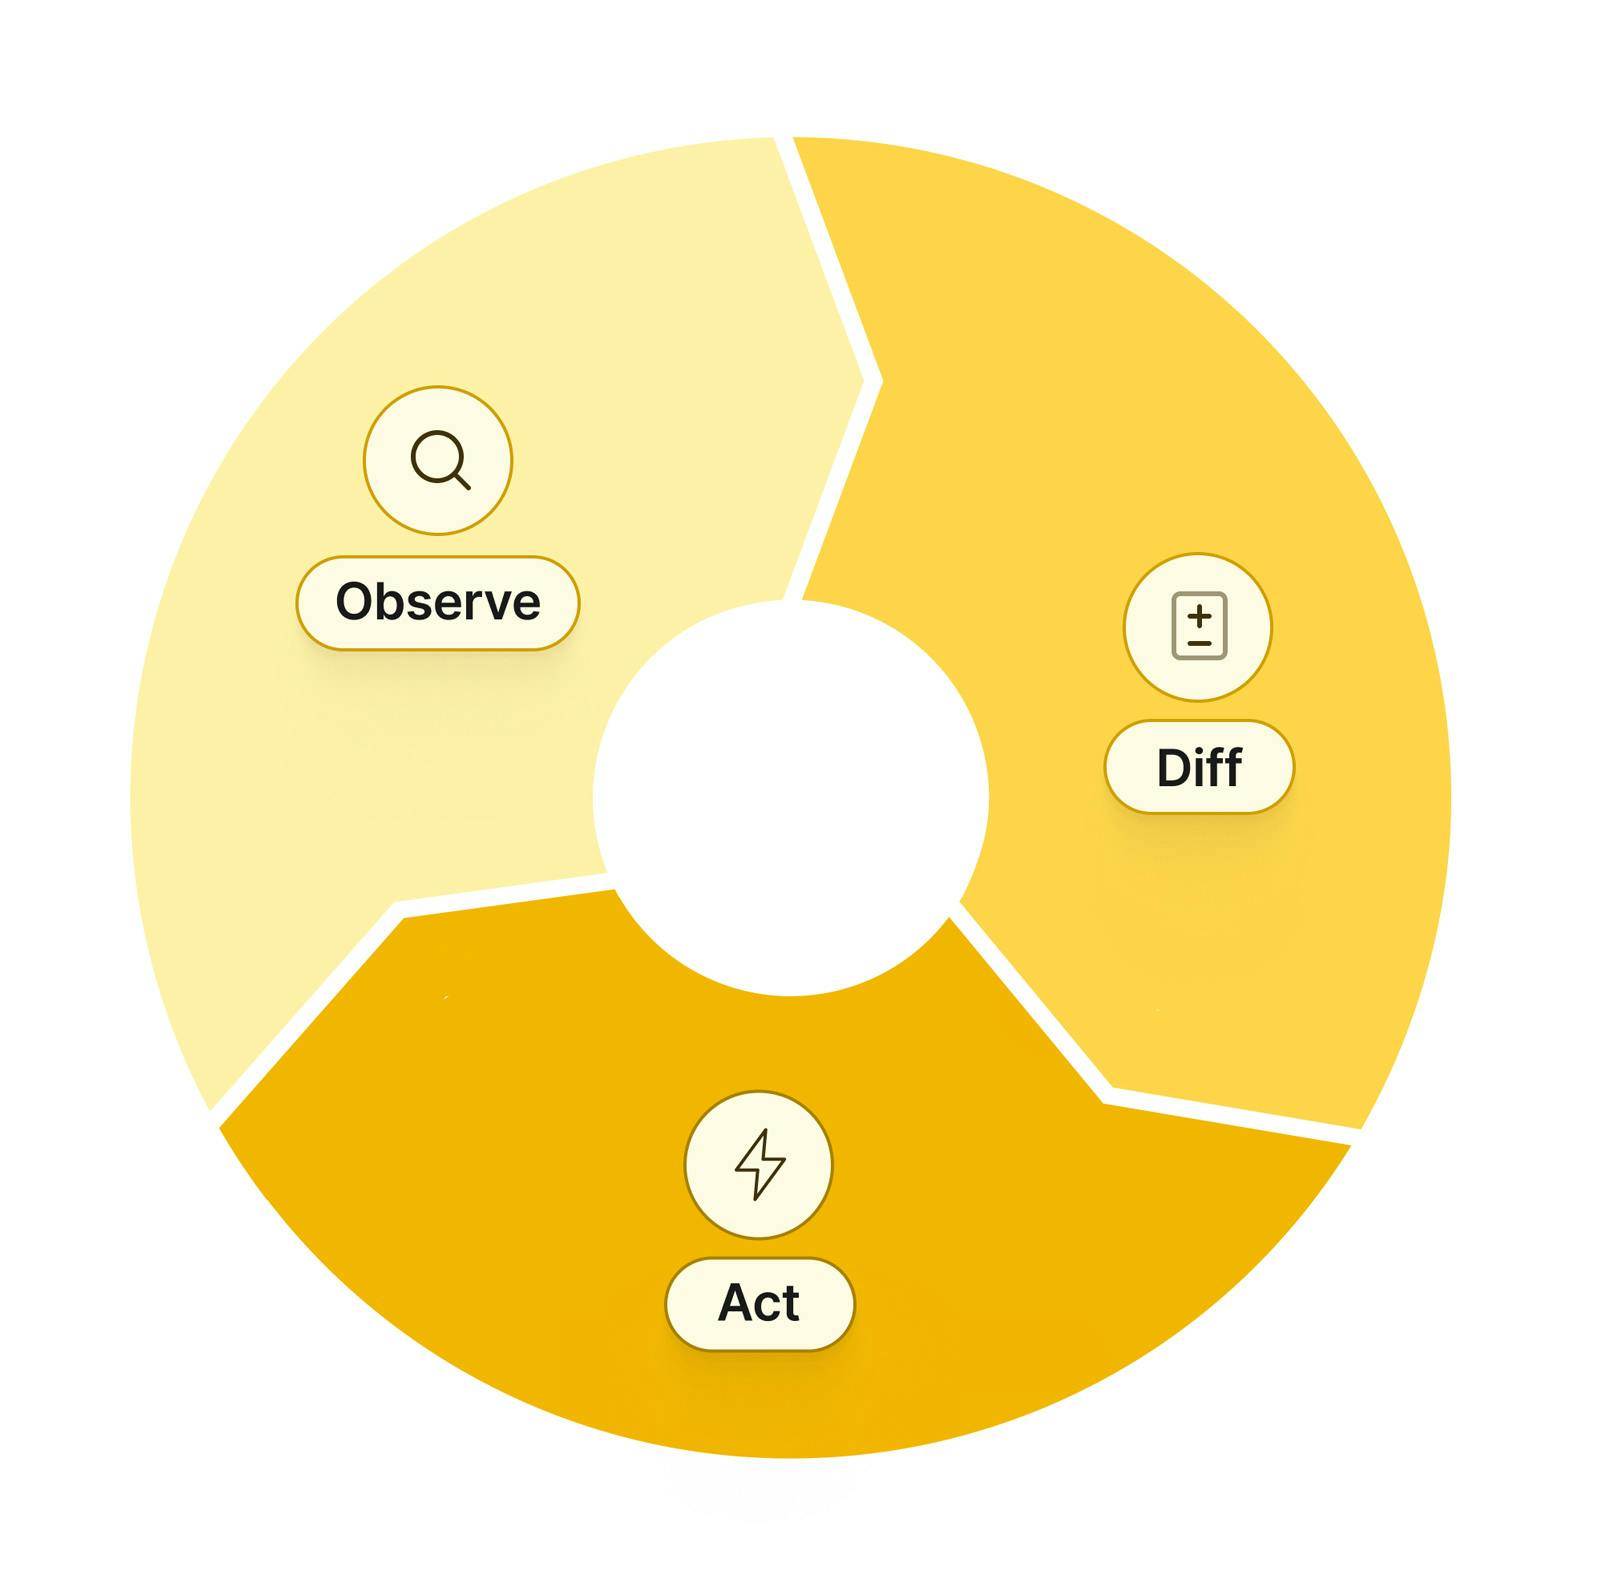 A circular diagram of the Kubernetes “Control Loop” showing 3 steps: Observe → Diff → Act